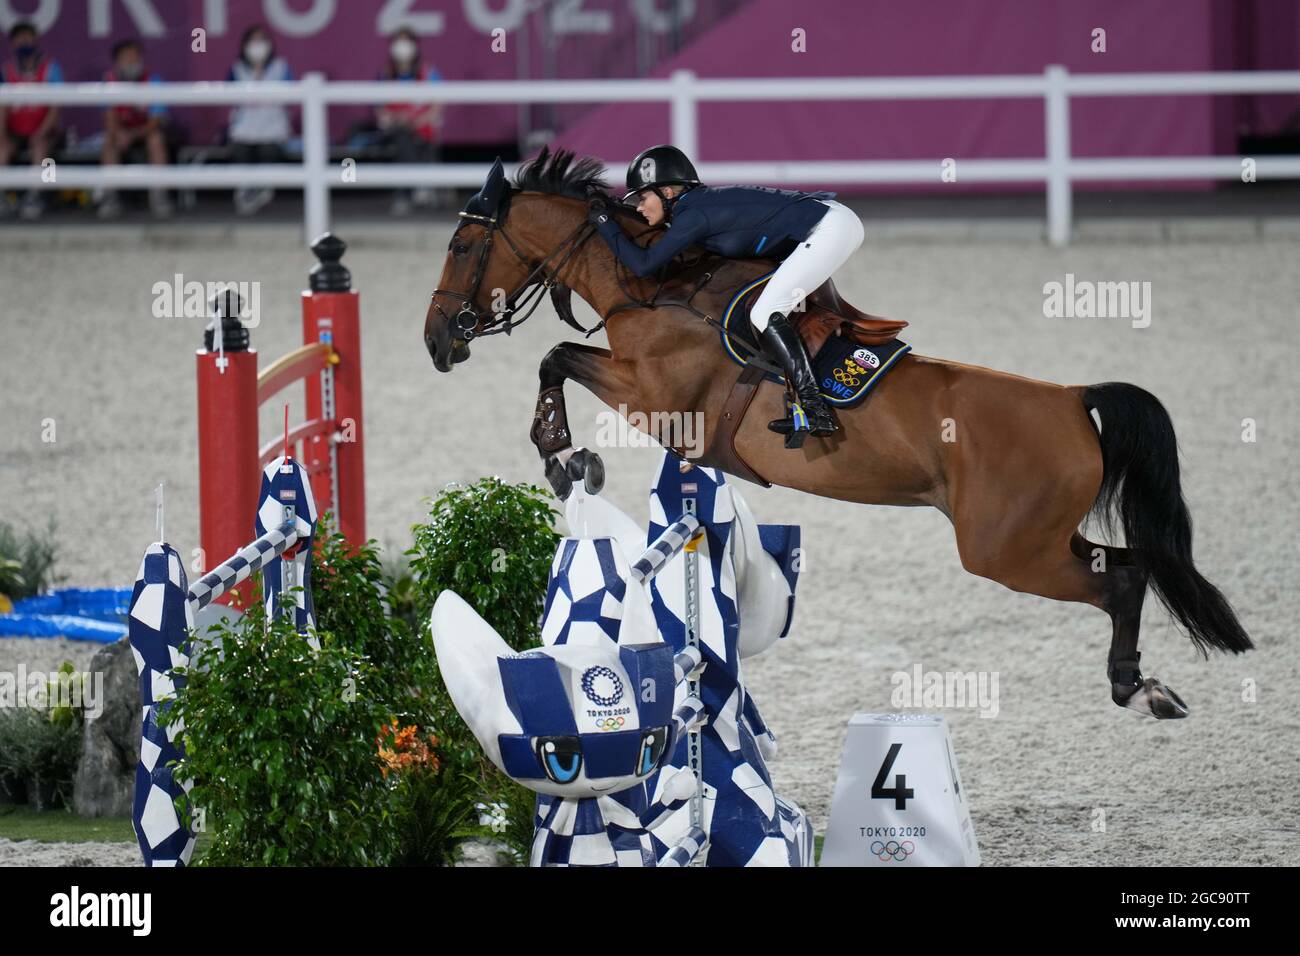 Tokyo, Japan. 7th Aug, 2021. Malin Baryard-Johnsson of Sweden competes during the equestrian jumping team final competition at the Tokyo 2020 Olympic Games in Tokyo, Japan, Aug. 7, 2021. Credit: Zhu Zheng/Xinhua/Alamy Live News Stock Photo